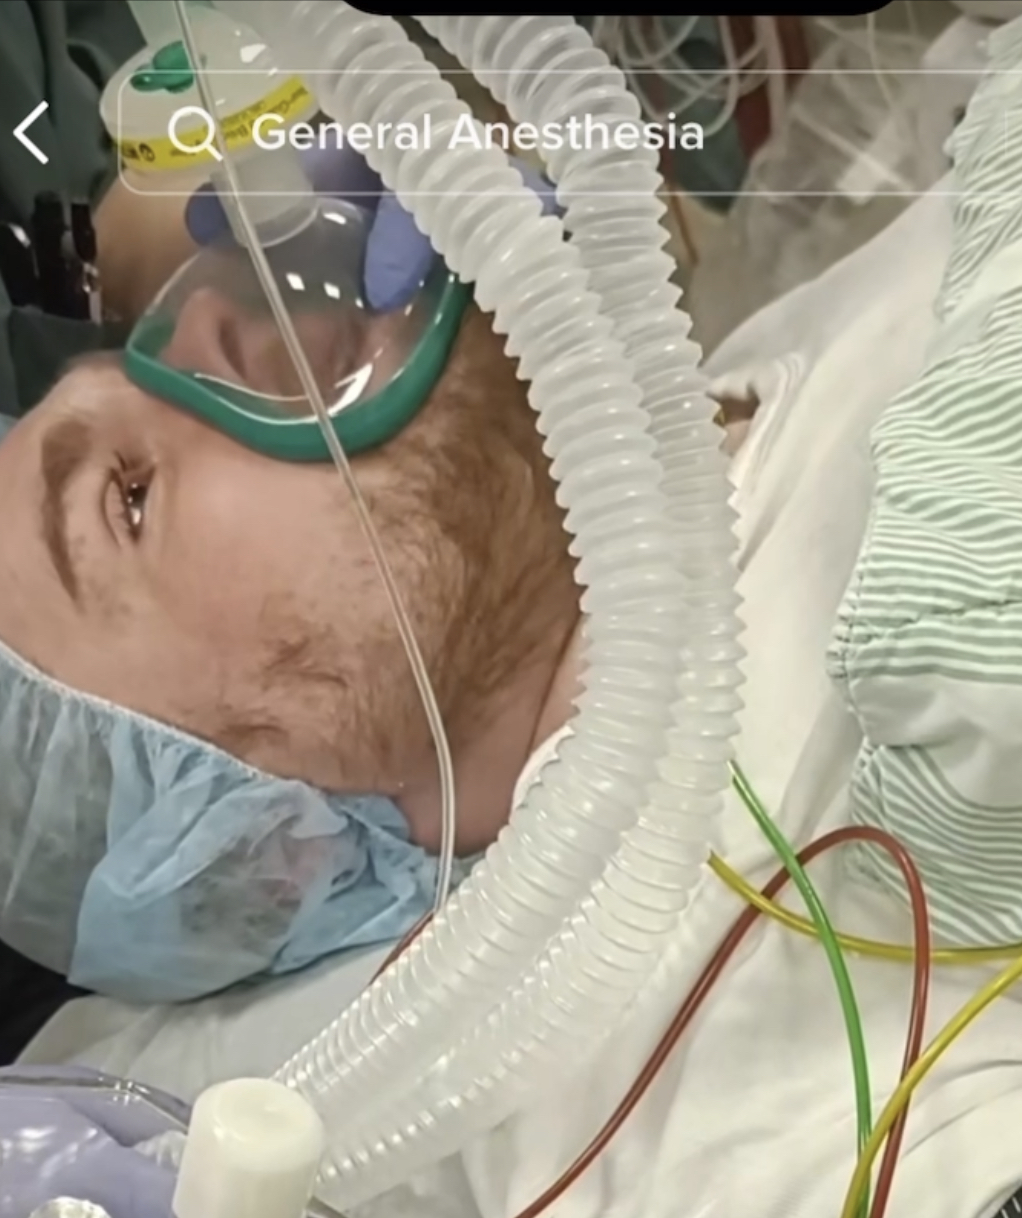 Man going under anesthesia